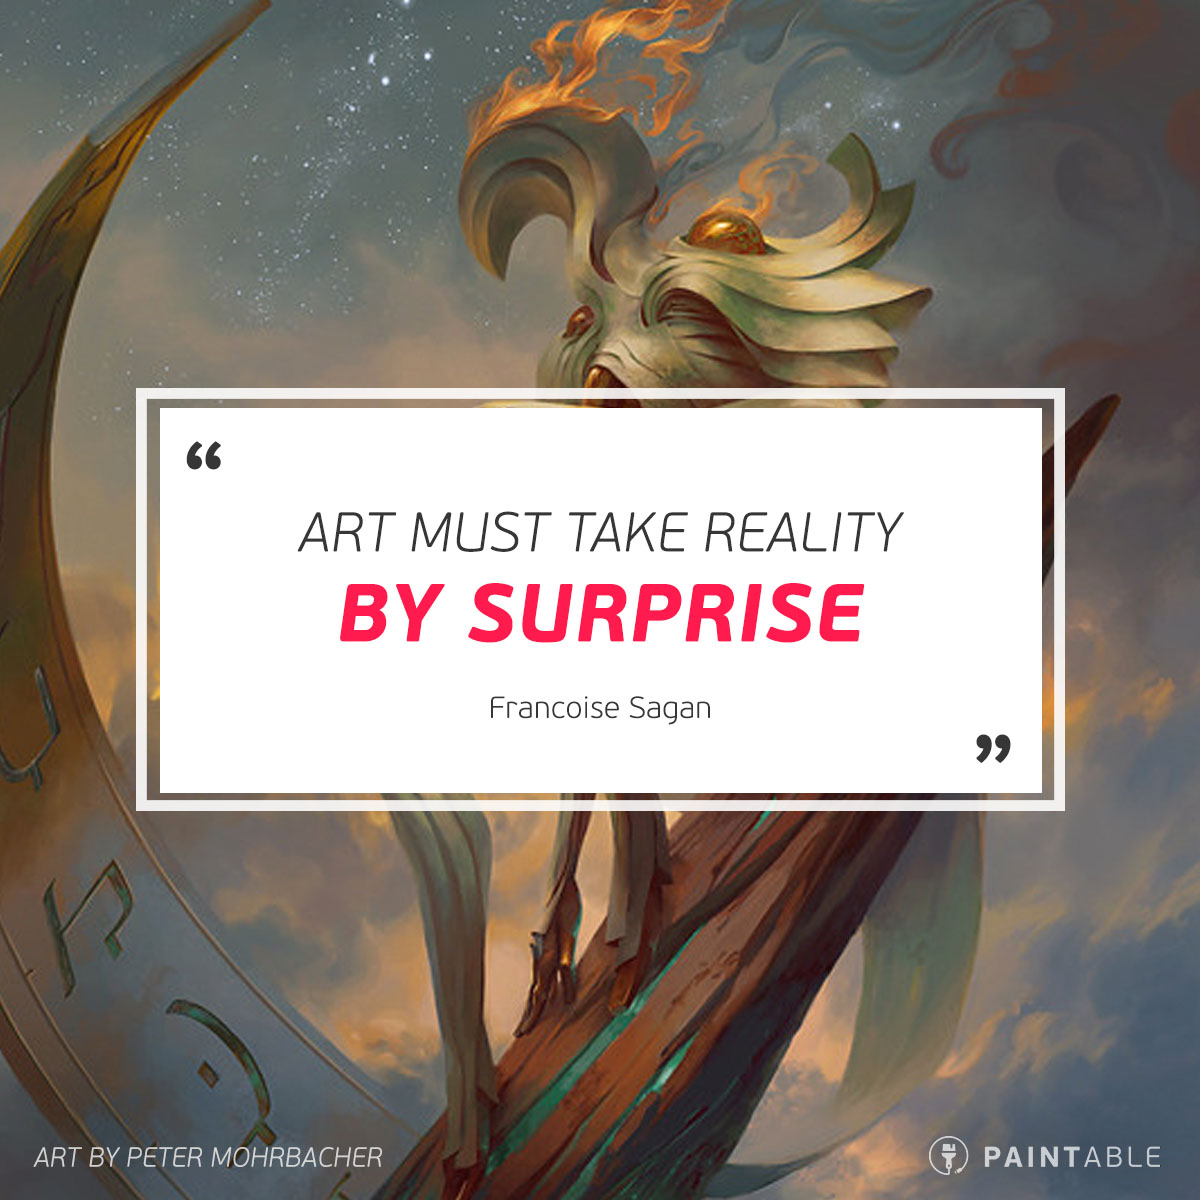 Peter Mohrbacher | 25 Inspirational Artist Quotes for Creatives and Digital Painters